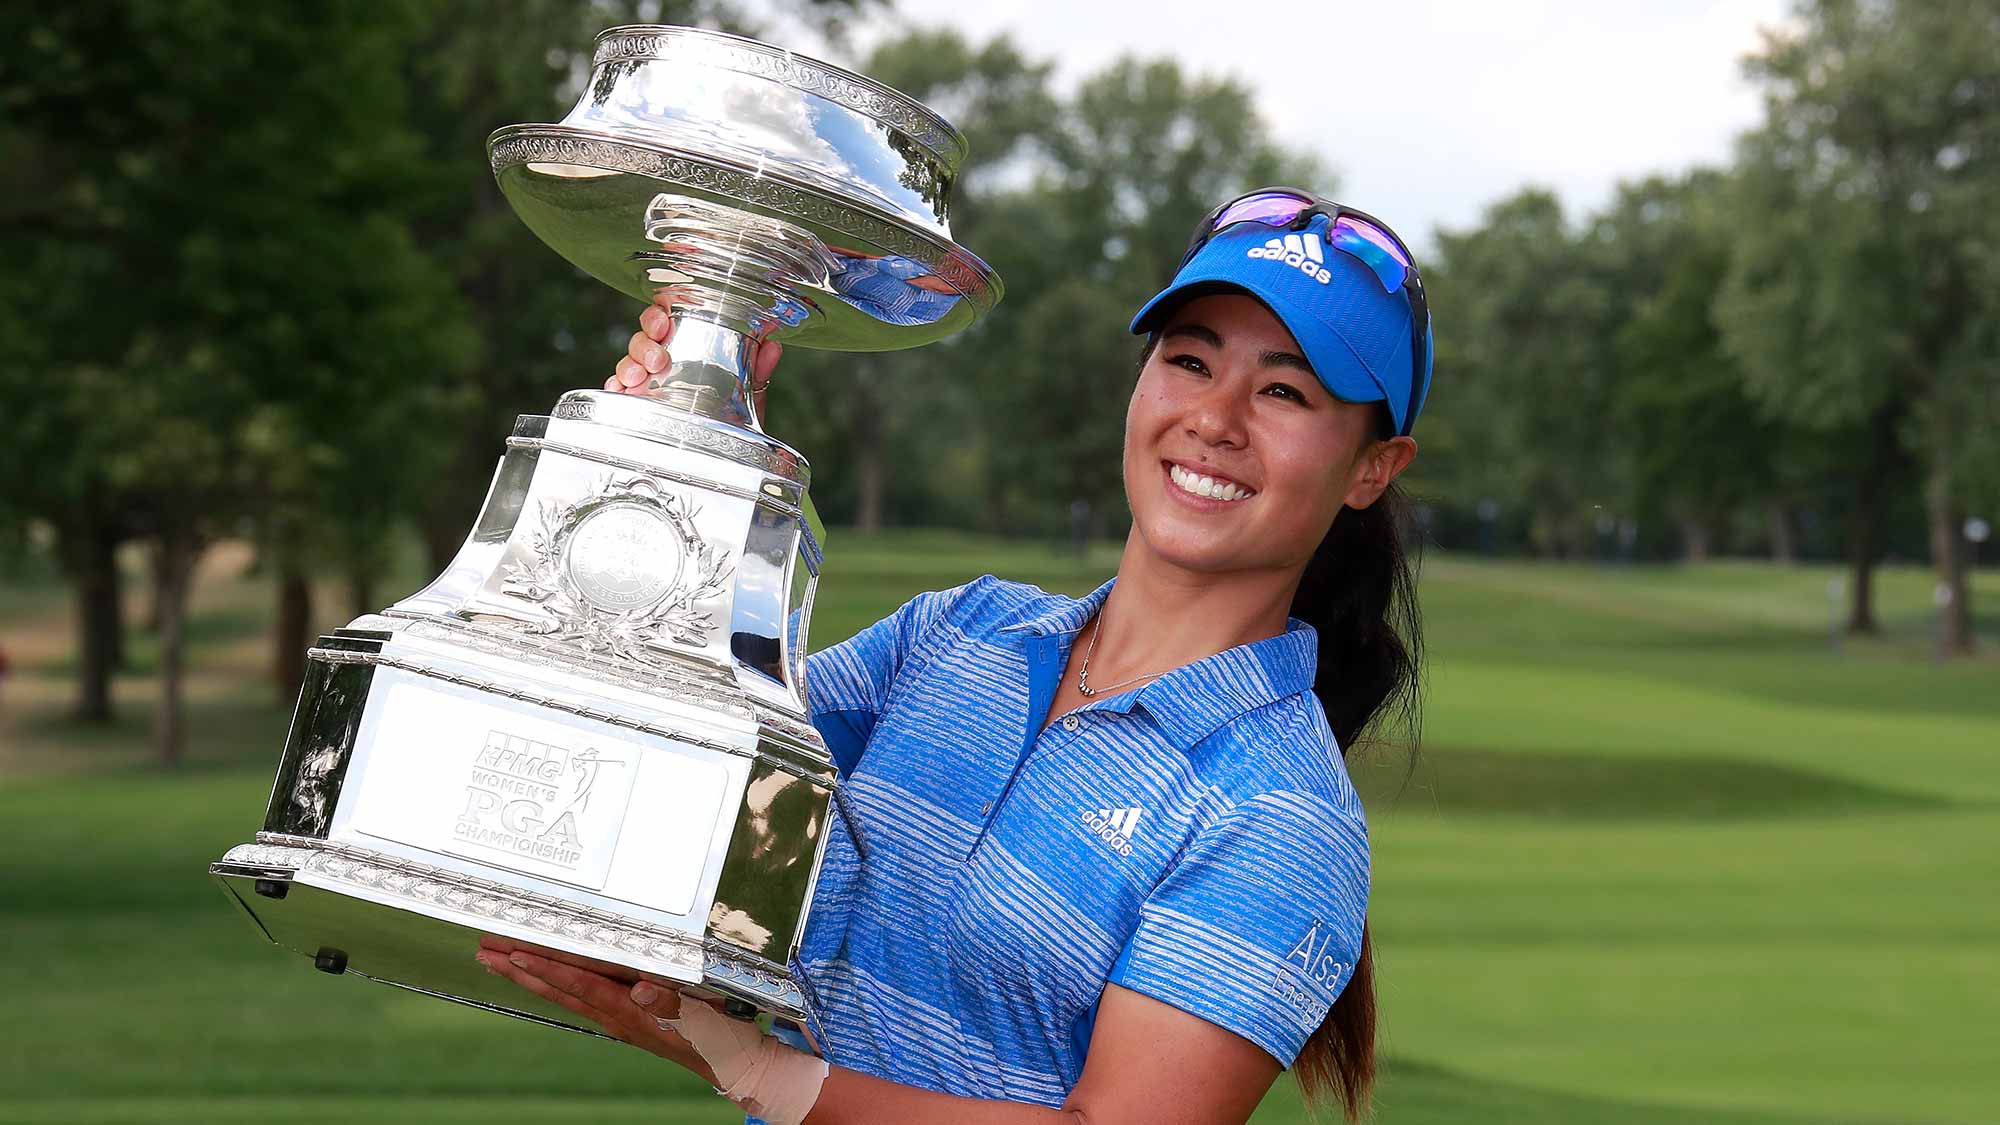 Danielle Kang poses with the championship trophy after winning the 2017 KPMG PGA Championship at Olympia Fields Country Club